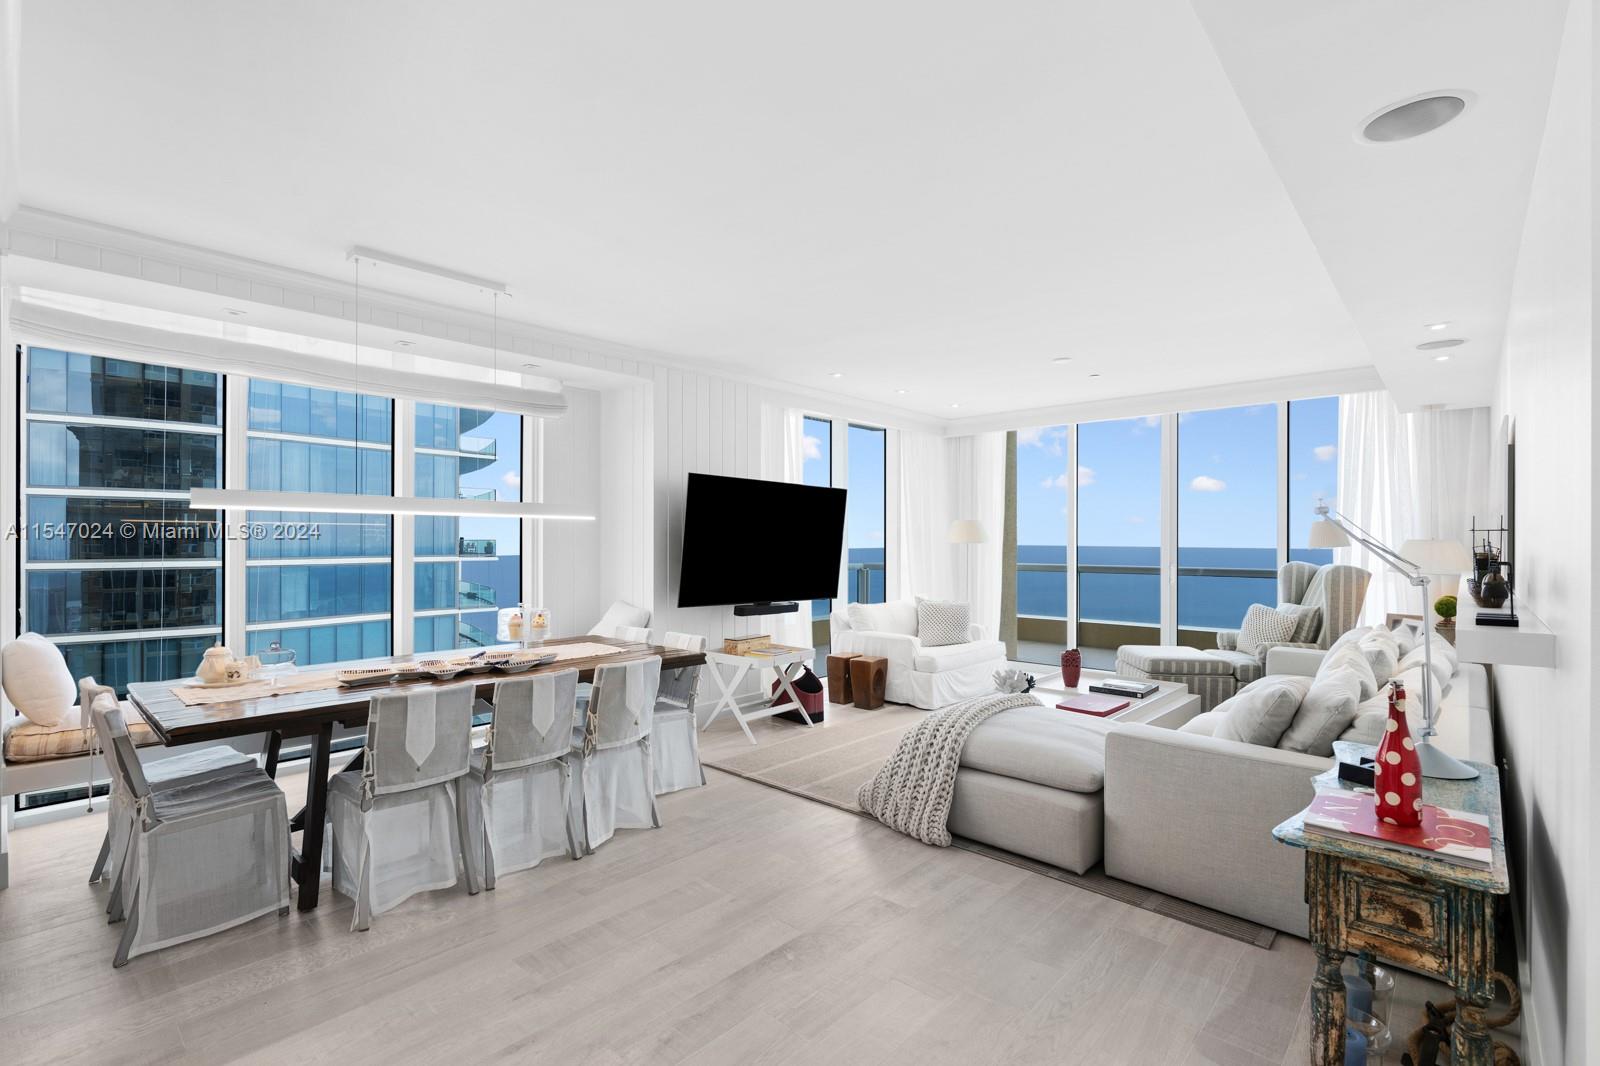 Listing Image 17875 Collins Ave #4401